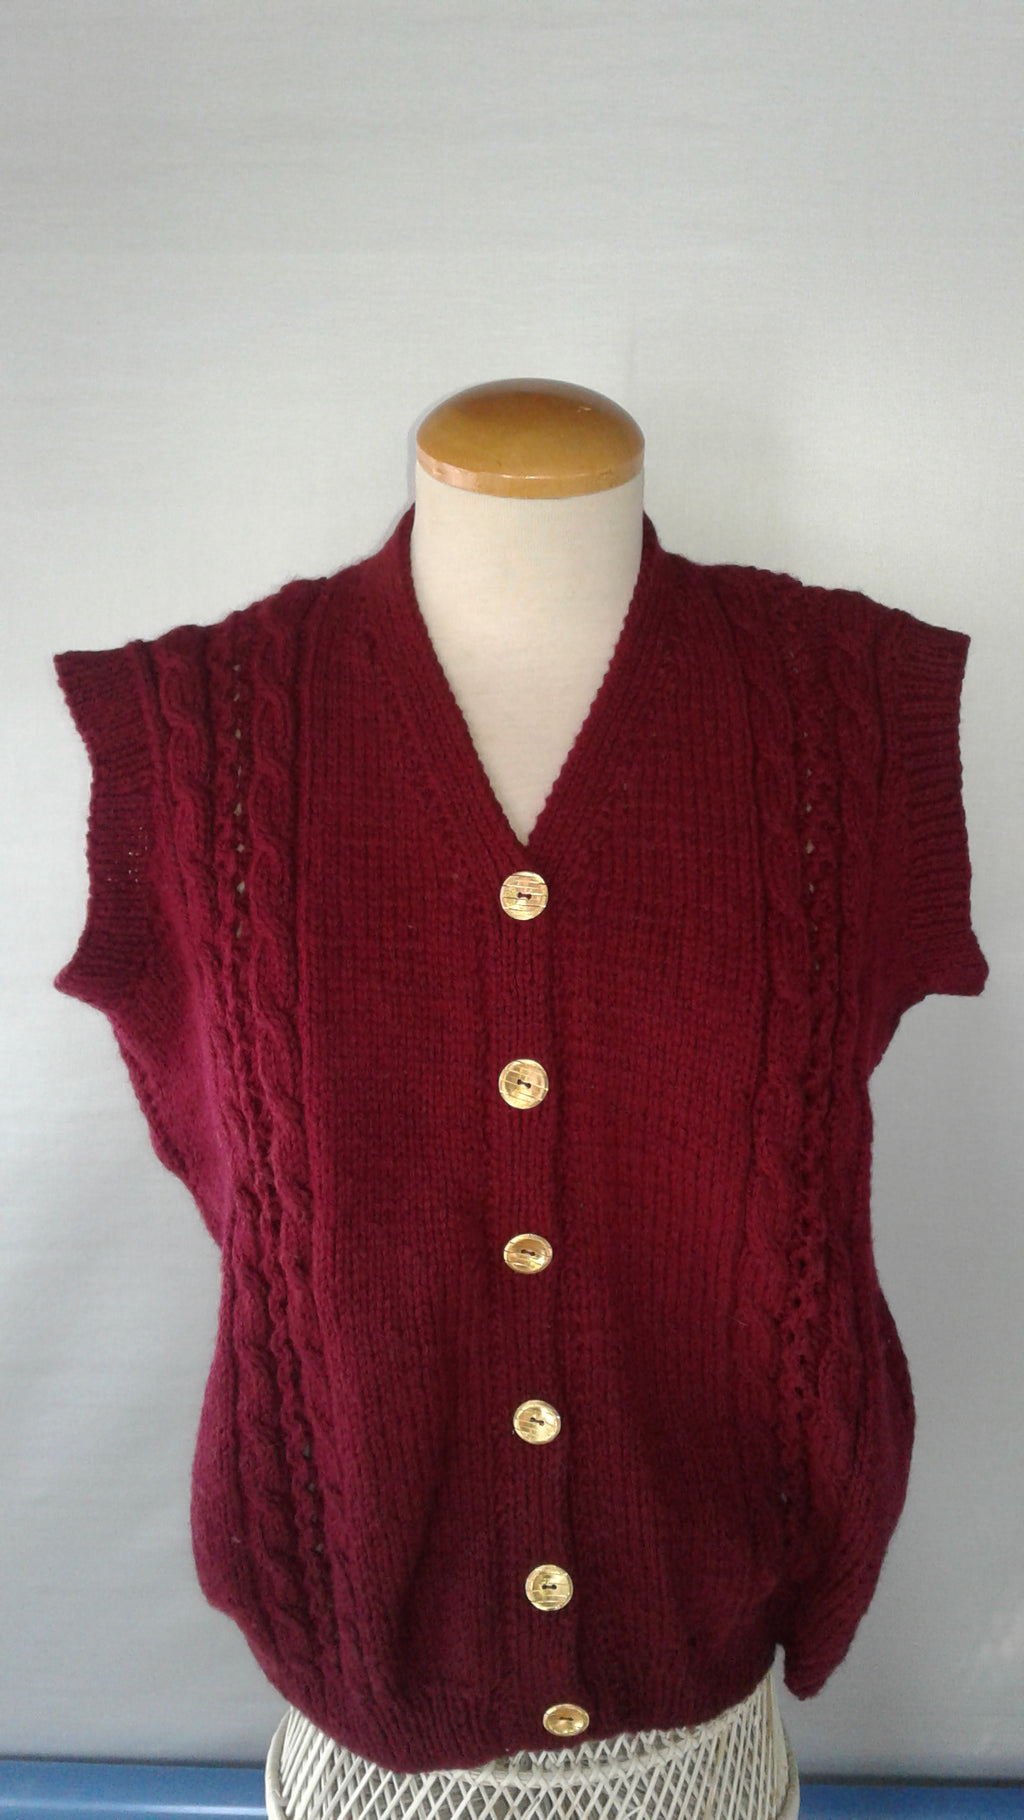 Burgundy Cabled Vest - 40" chest